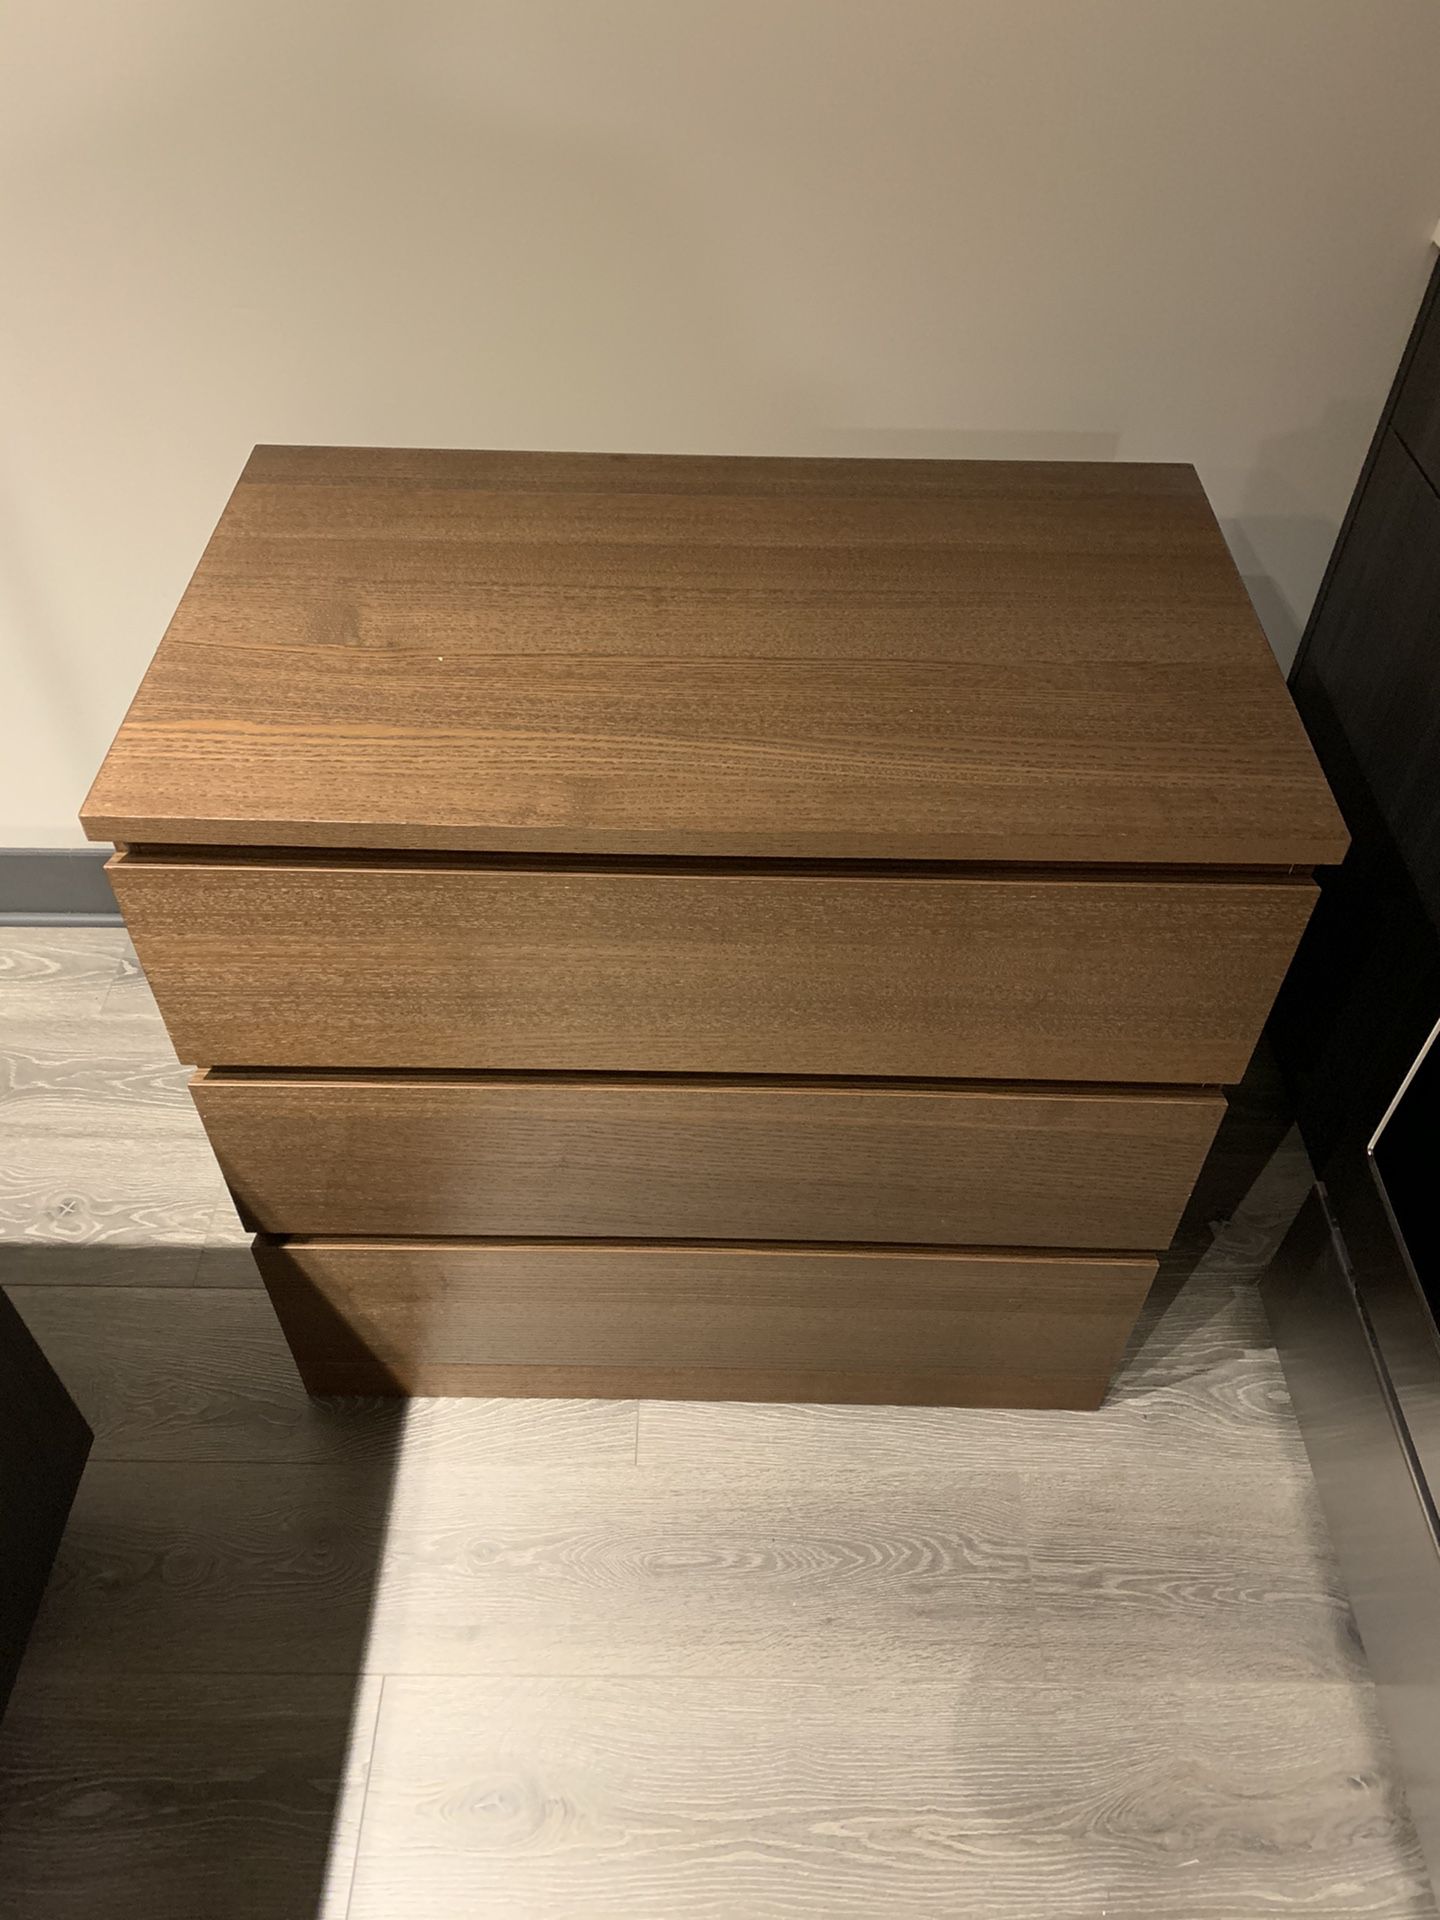 MALM 3-drawer chest - brown stained ash veneer